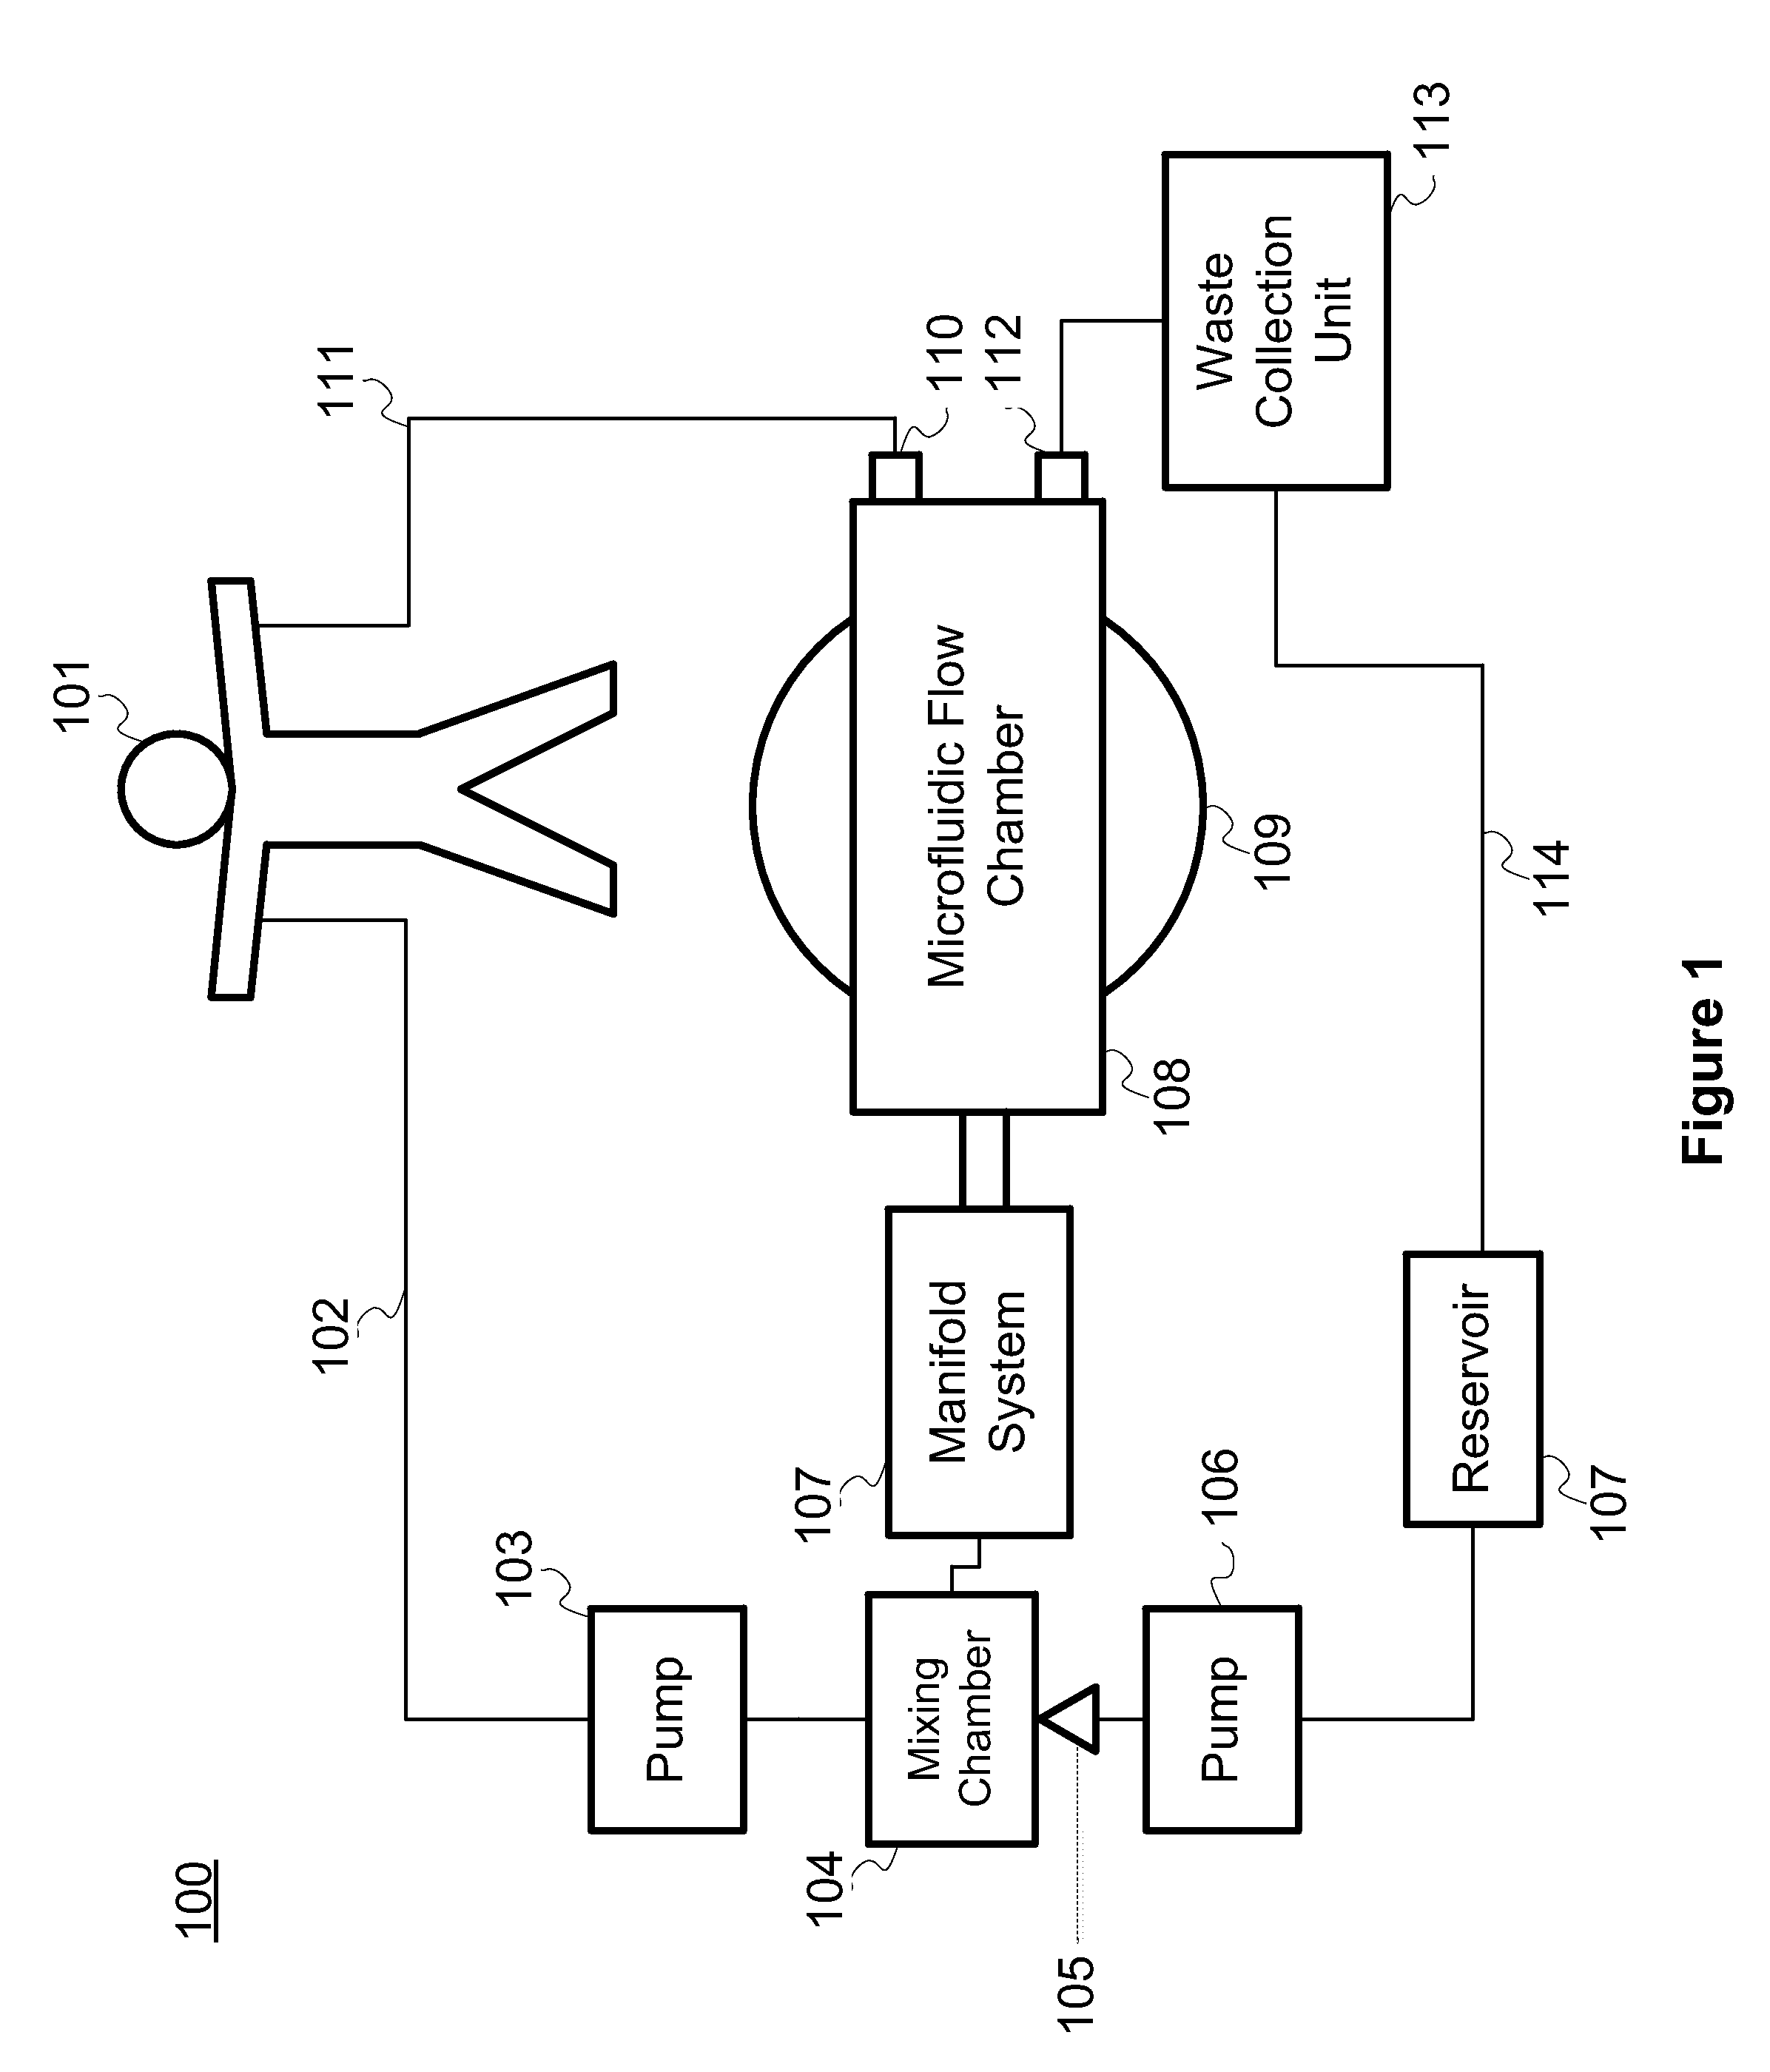 System and method for blood separation by microfluidic acoustic focusing